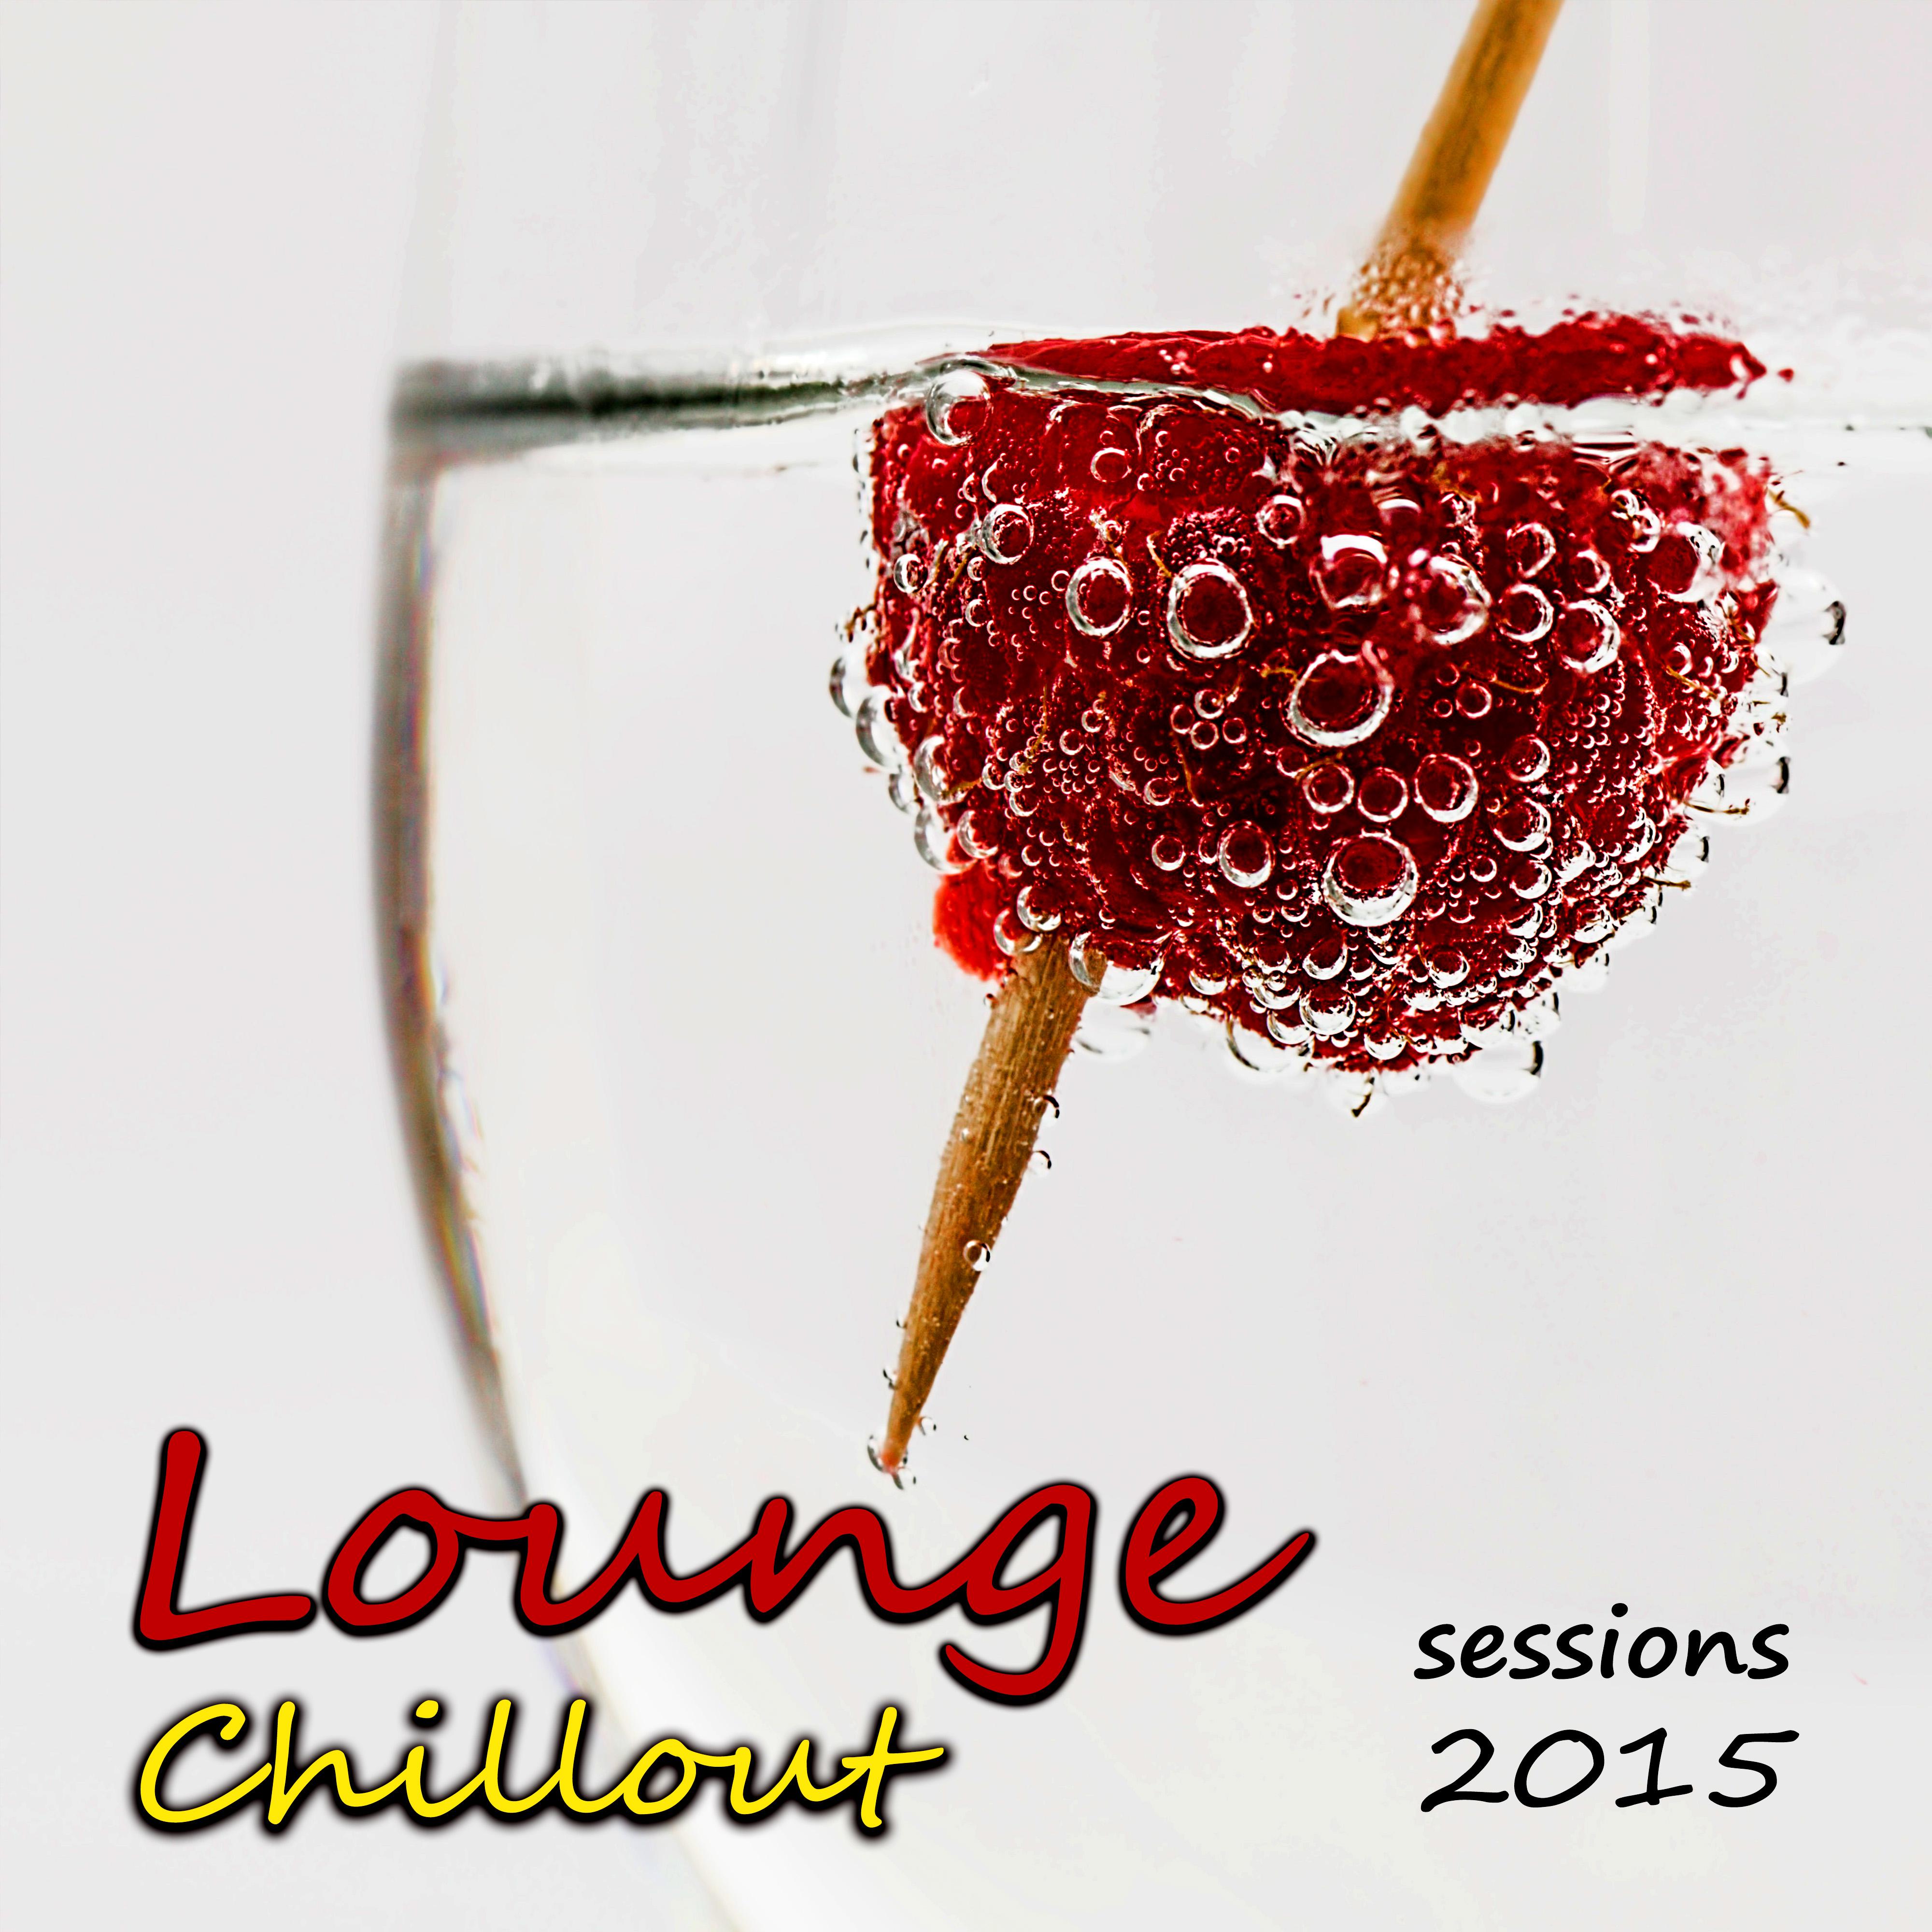 Lounge Chillout Sessions 2015 - Best Chill Music, Total Relax, Ibiza Beach *** Party & Cocktail Party, Summertime, Rest, Electronic Music